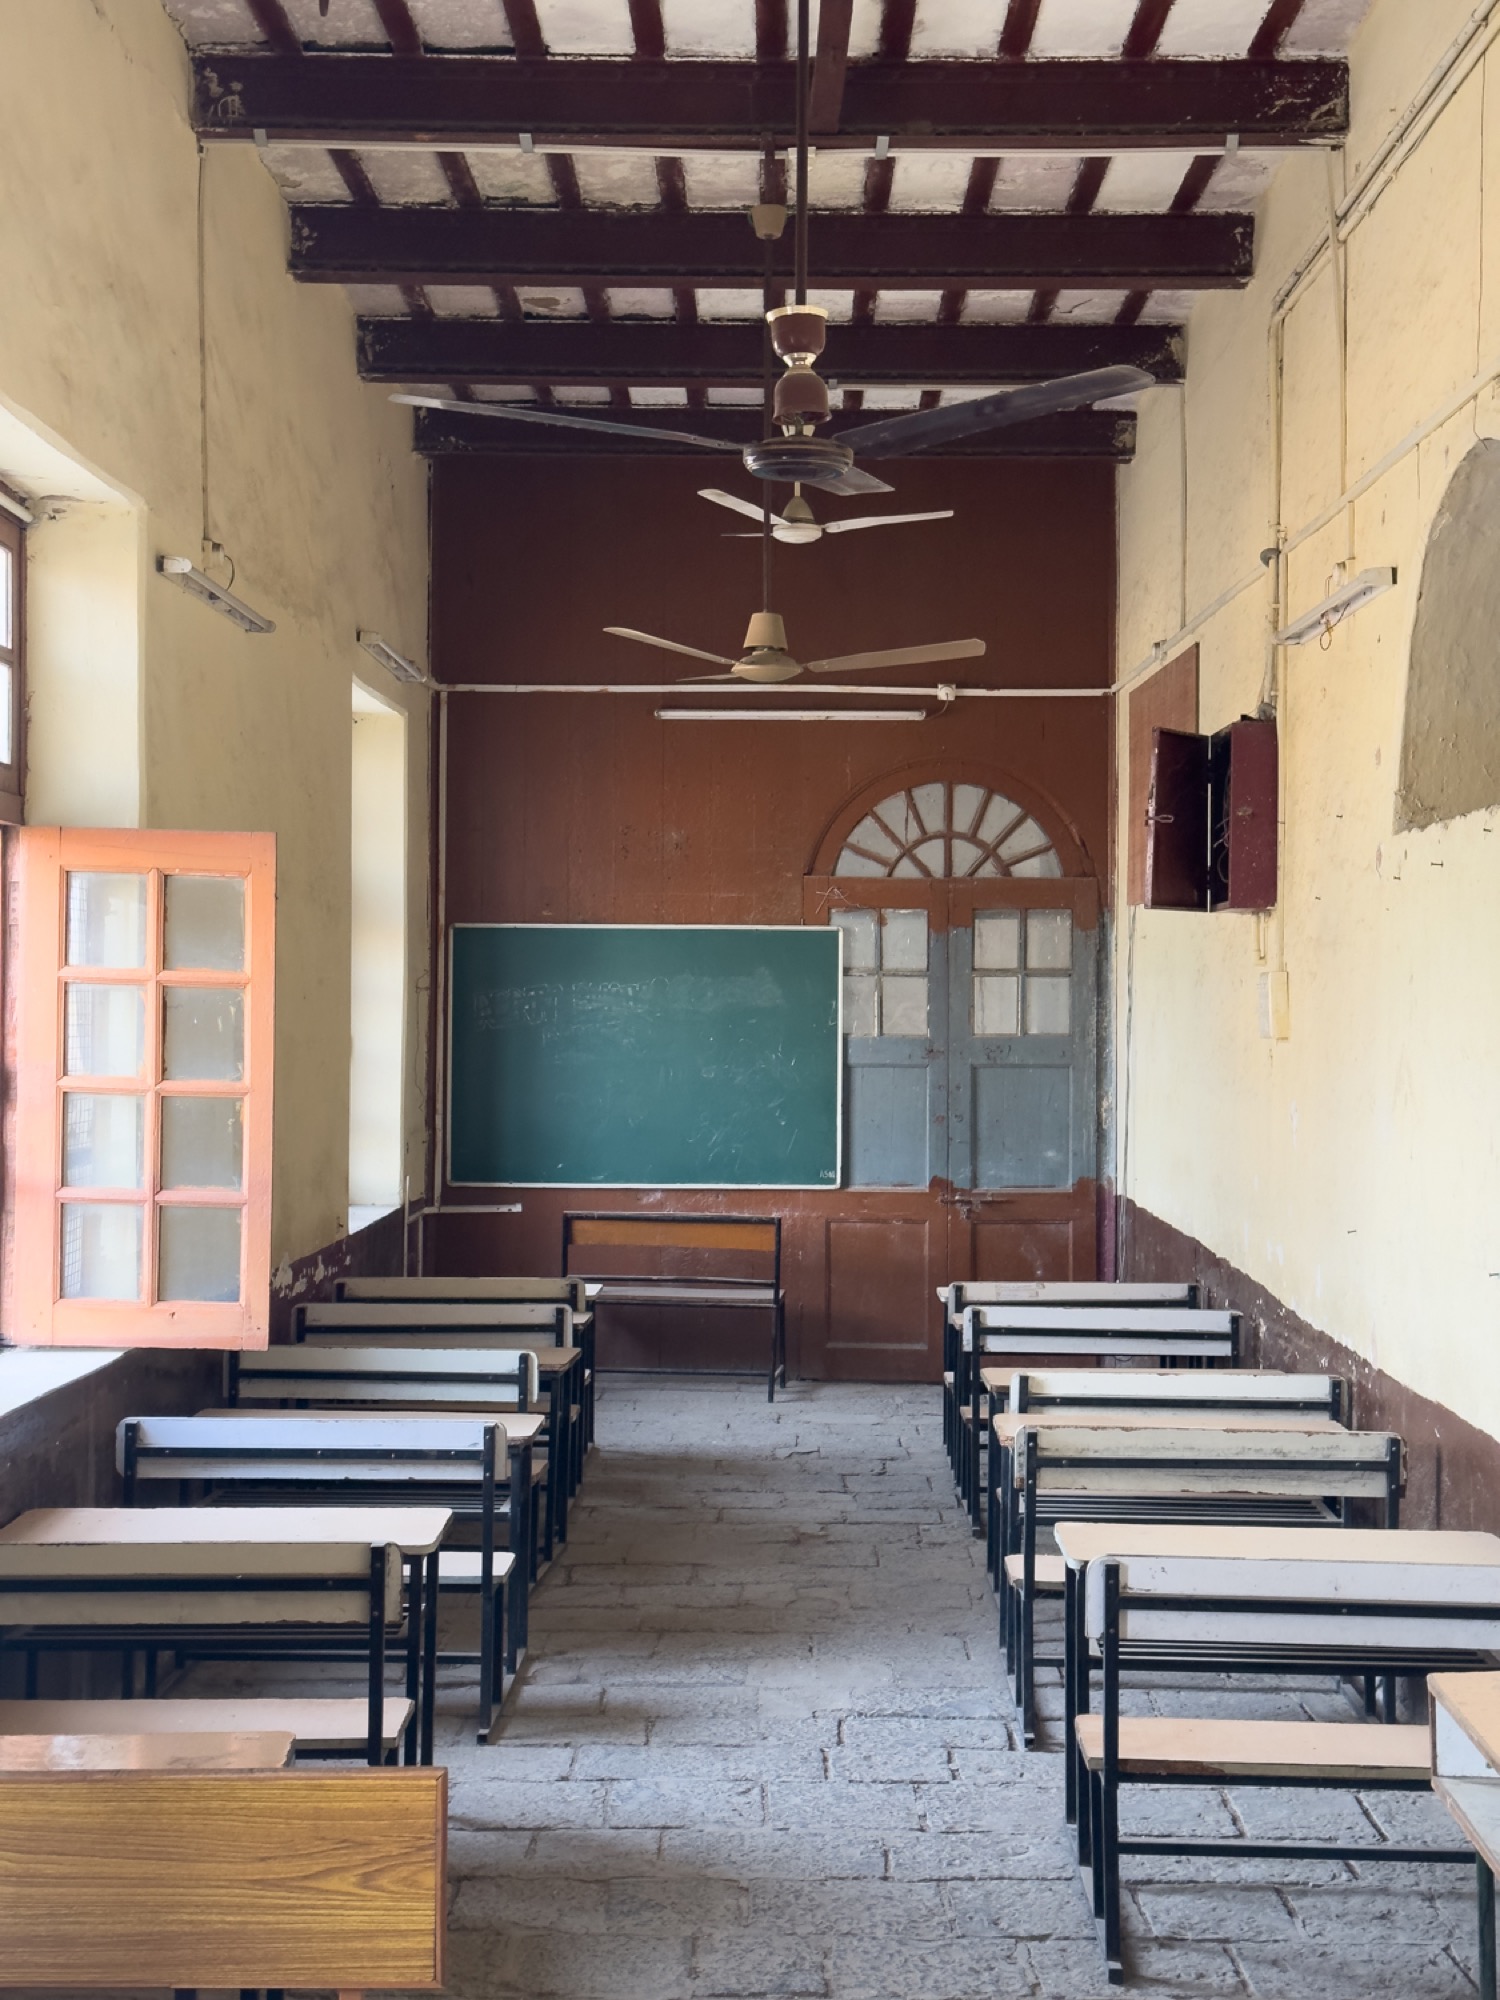 Heritage at risk: Outcry to stop demolition of a 157 year old Army Public School at MHOW 19